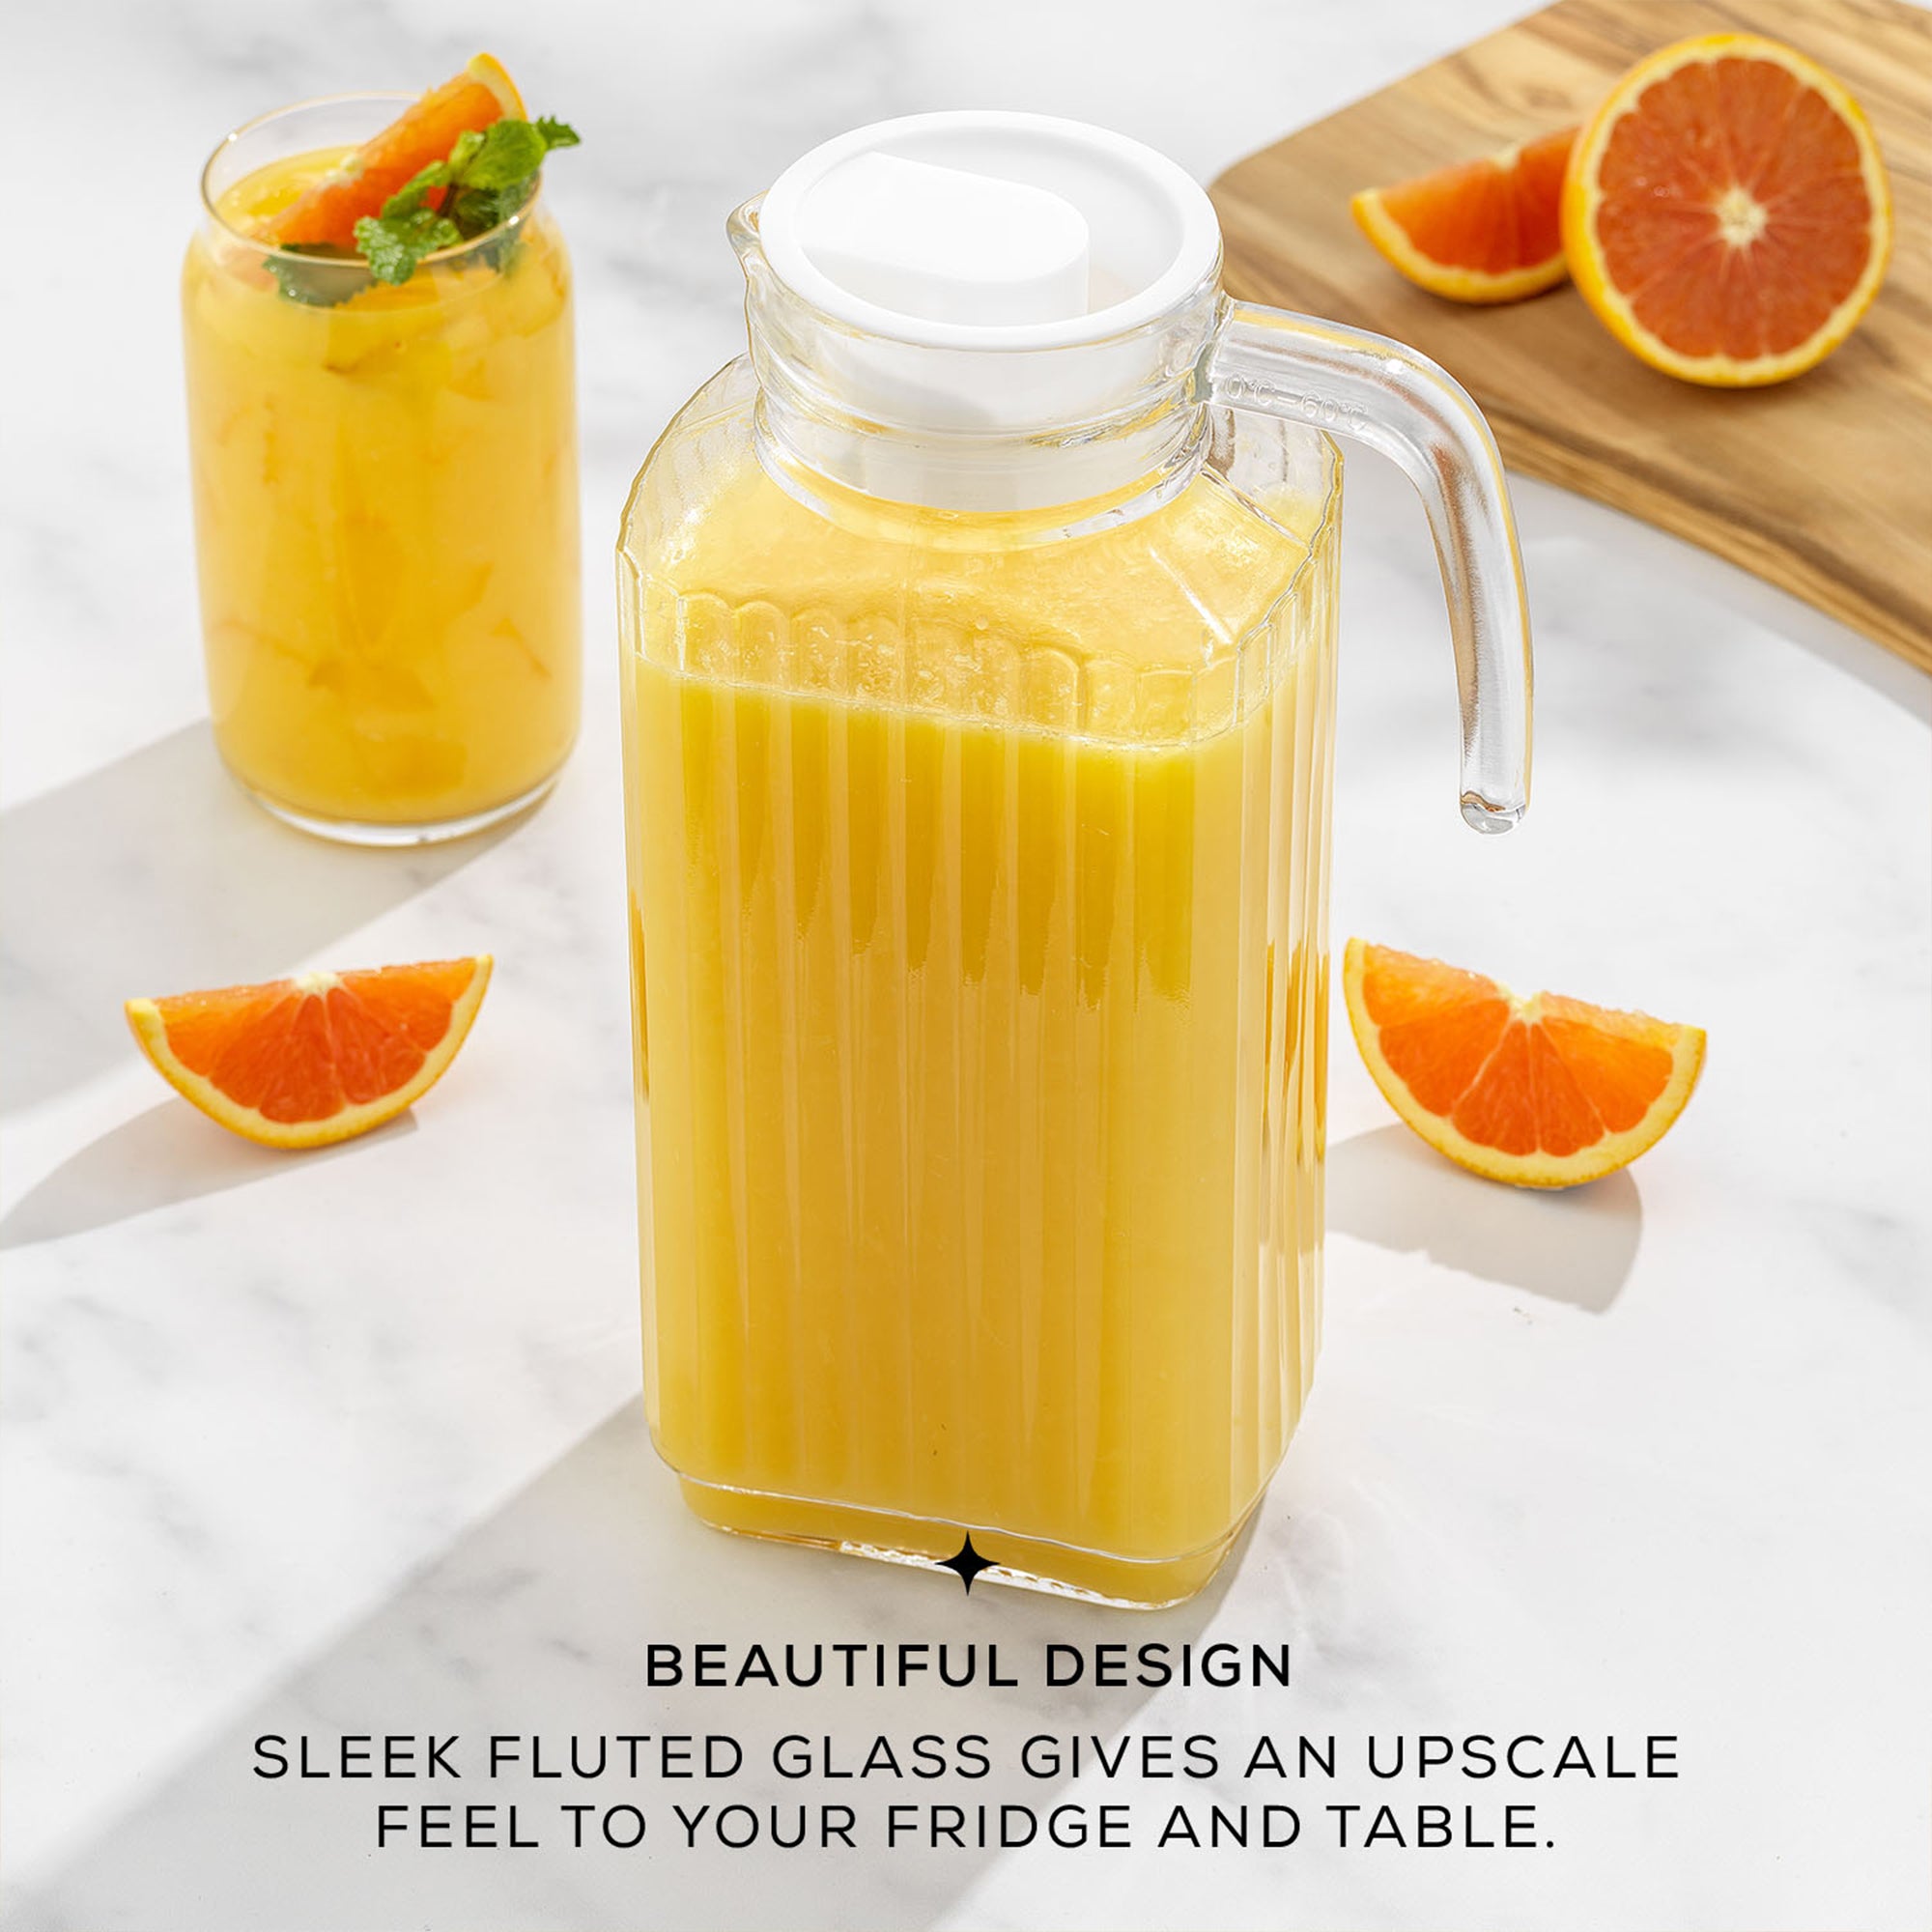 A large, clear glass pitcher filled with orange juice sits on a table next to a pile of oranges. The pitcher has a sleek, fluted design and a lid.  Text on the image reads  “BEAUTIFUL DESIGN. SLEEK FLUTED GLASS GIVES AN UPSCALE BEAUTIFUL DESIGN FEEL TO YOUR FRIDGE AND TABLE.”  This is a JoyJolt Beverage Serveware Glass Pitcher, 60oz.